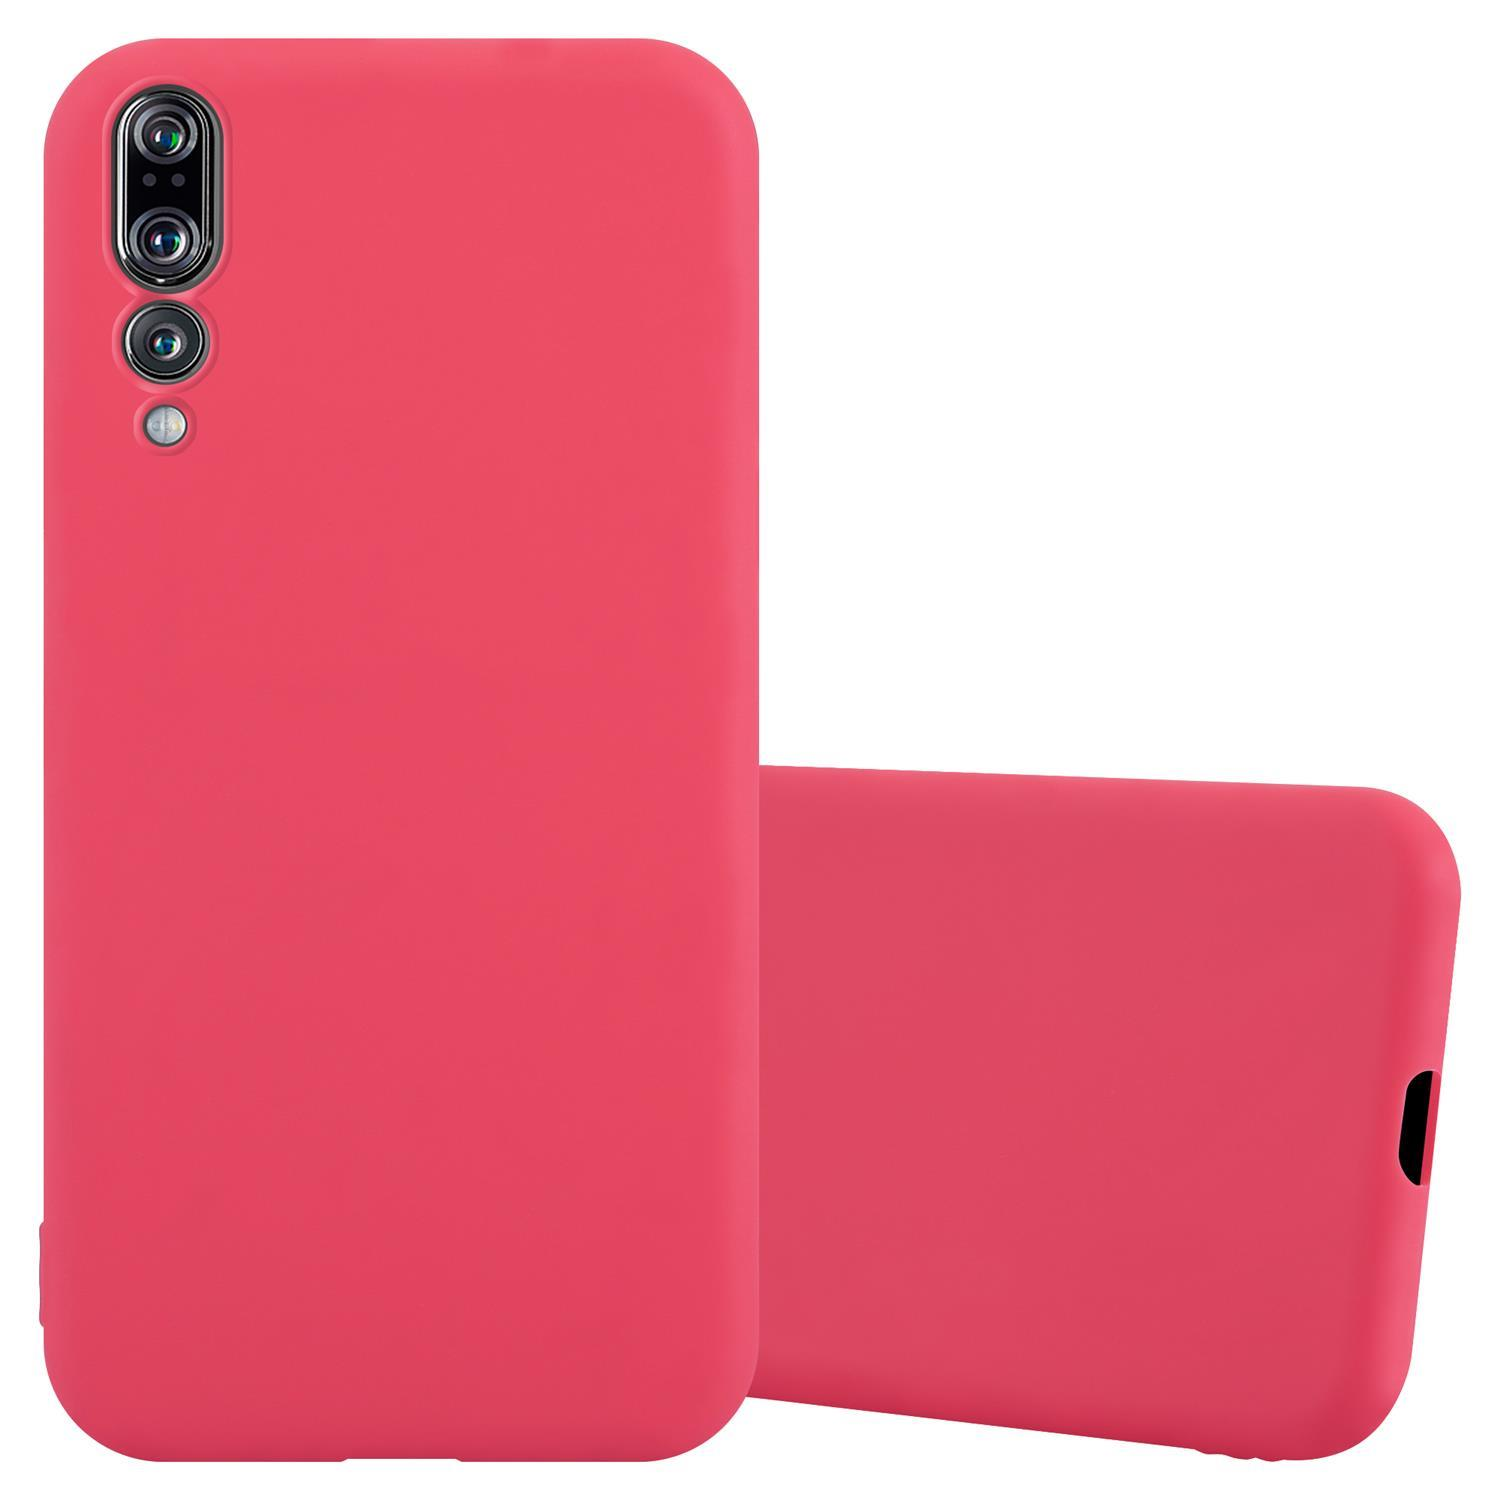 Candy Style, P20 CANDY Backcover, / P20 Hülle ROT Huawei, TPU PLUS, CADORABO im PRO